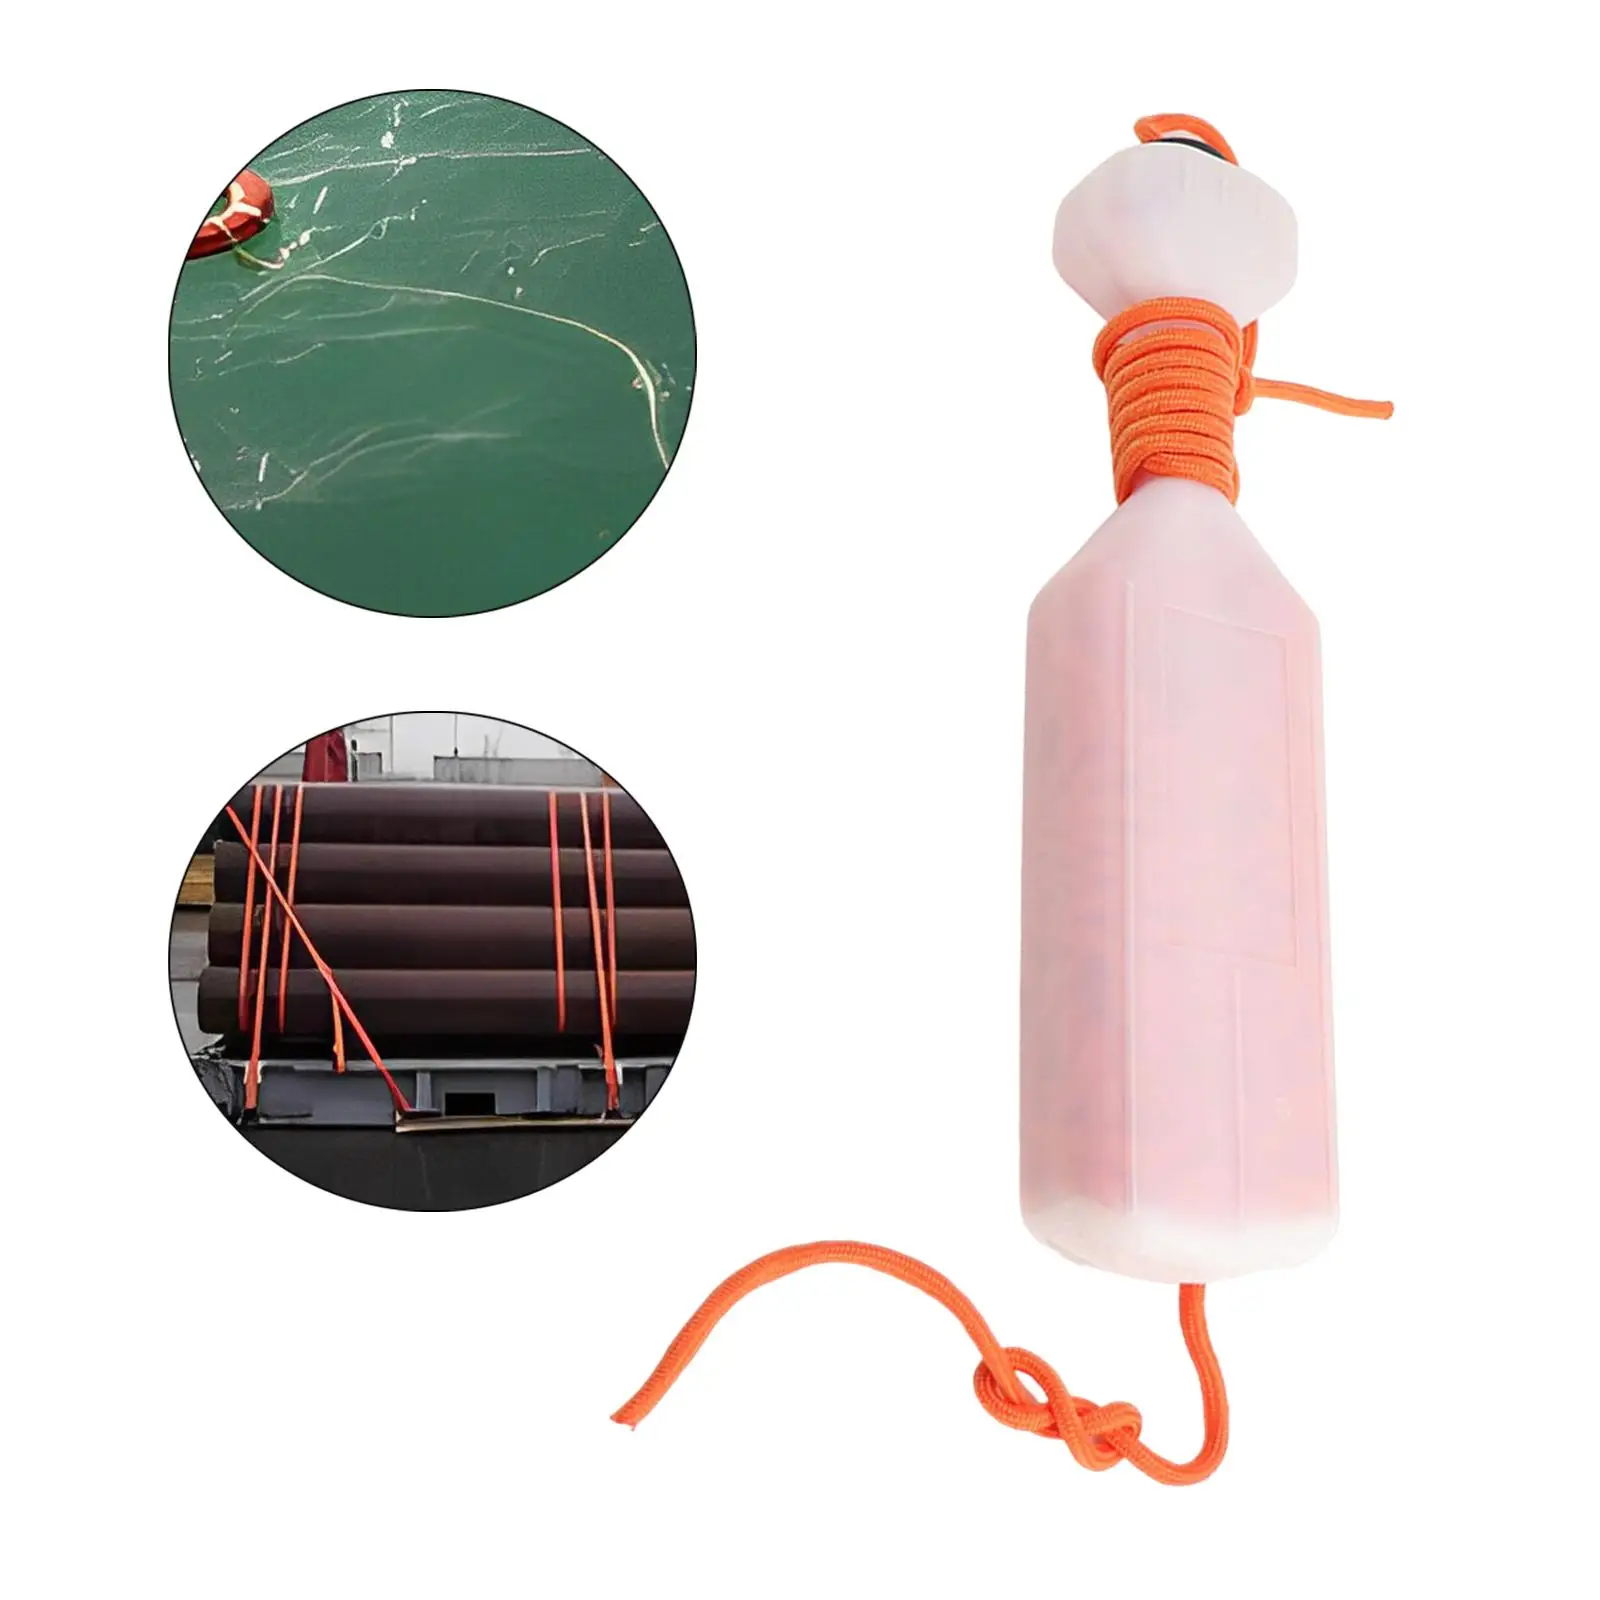 Floating Rescue Throw Rope Equipment Storage Bottle 30M Durable 8mm for Kayaking Rafting Climbing Outdoor Activities